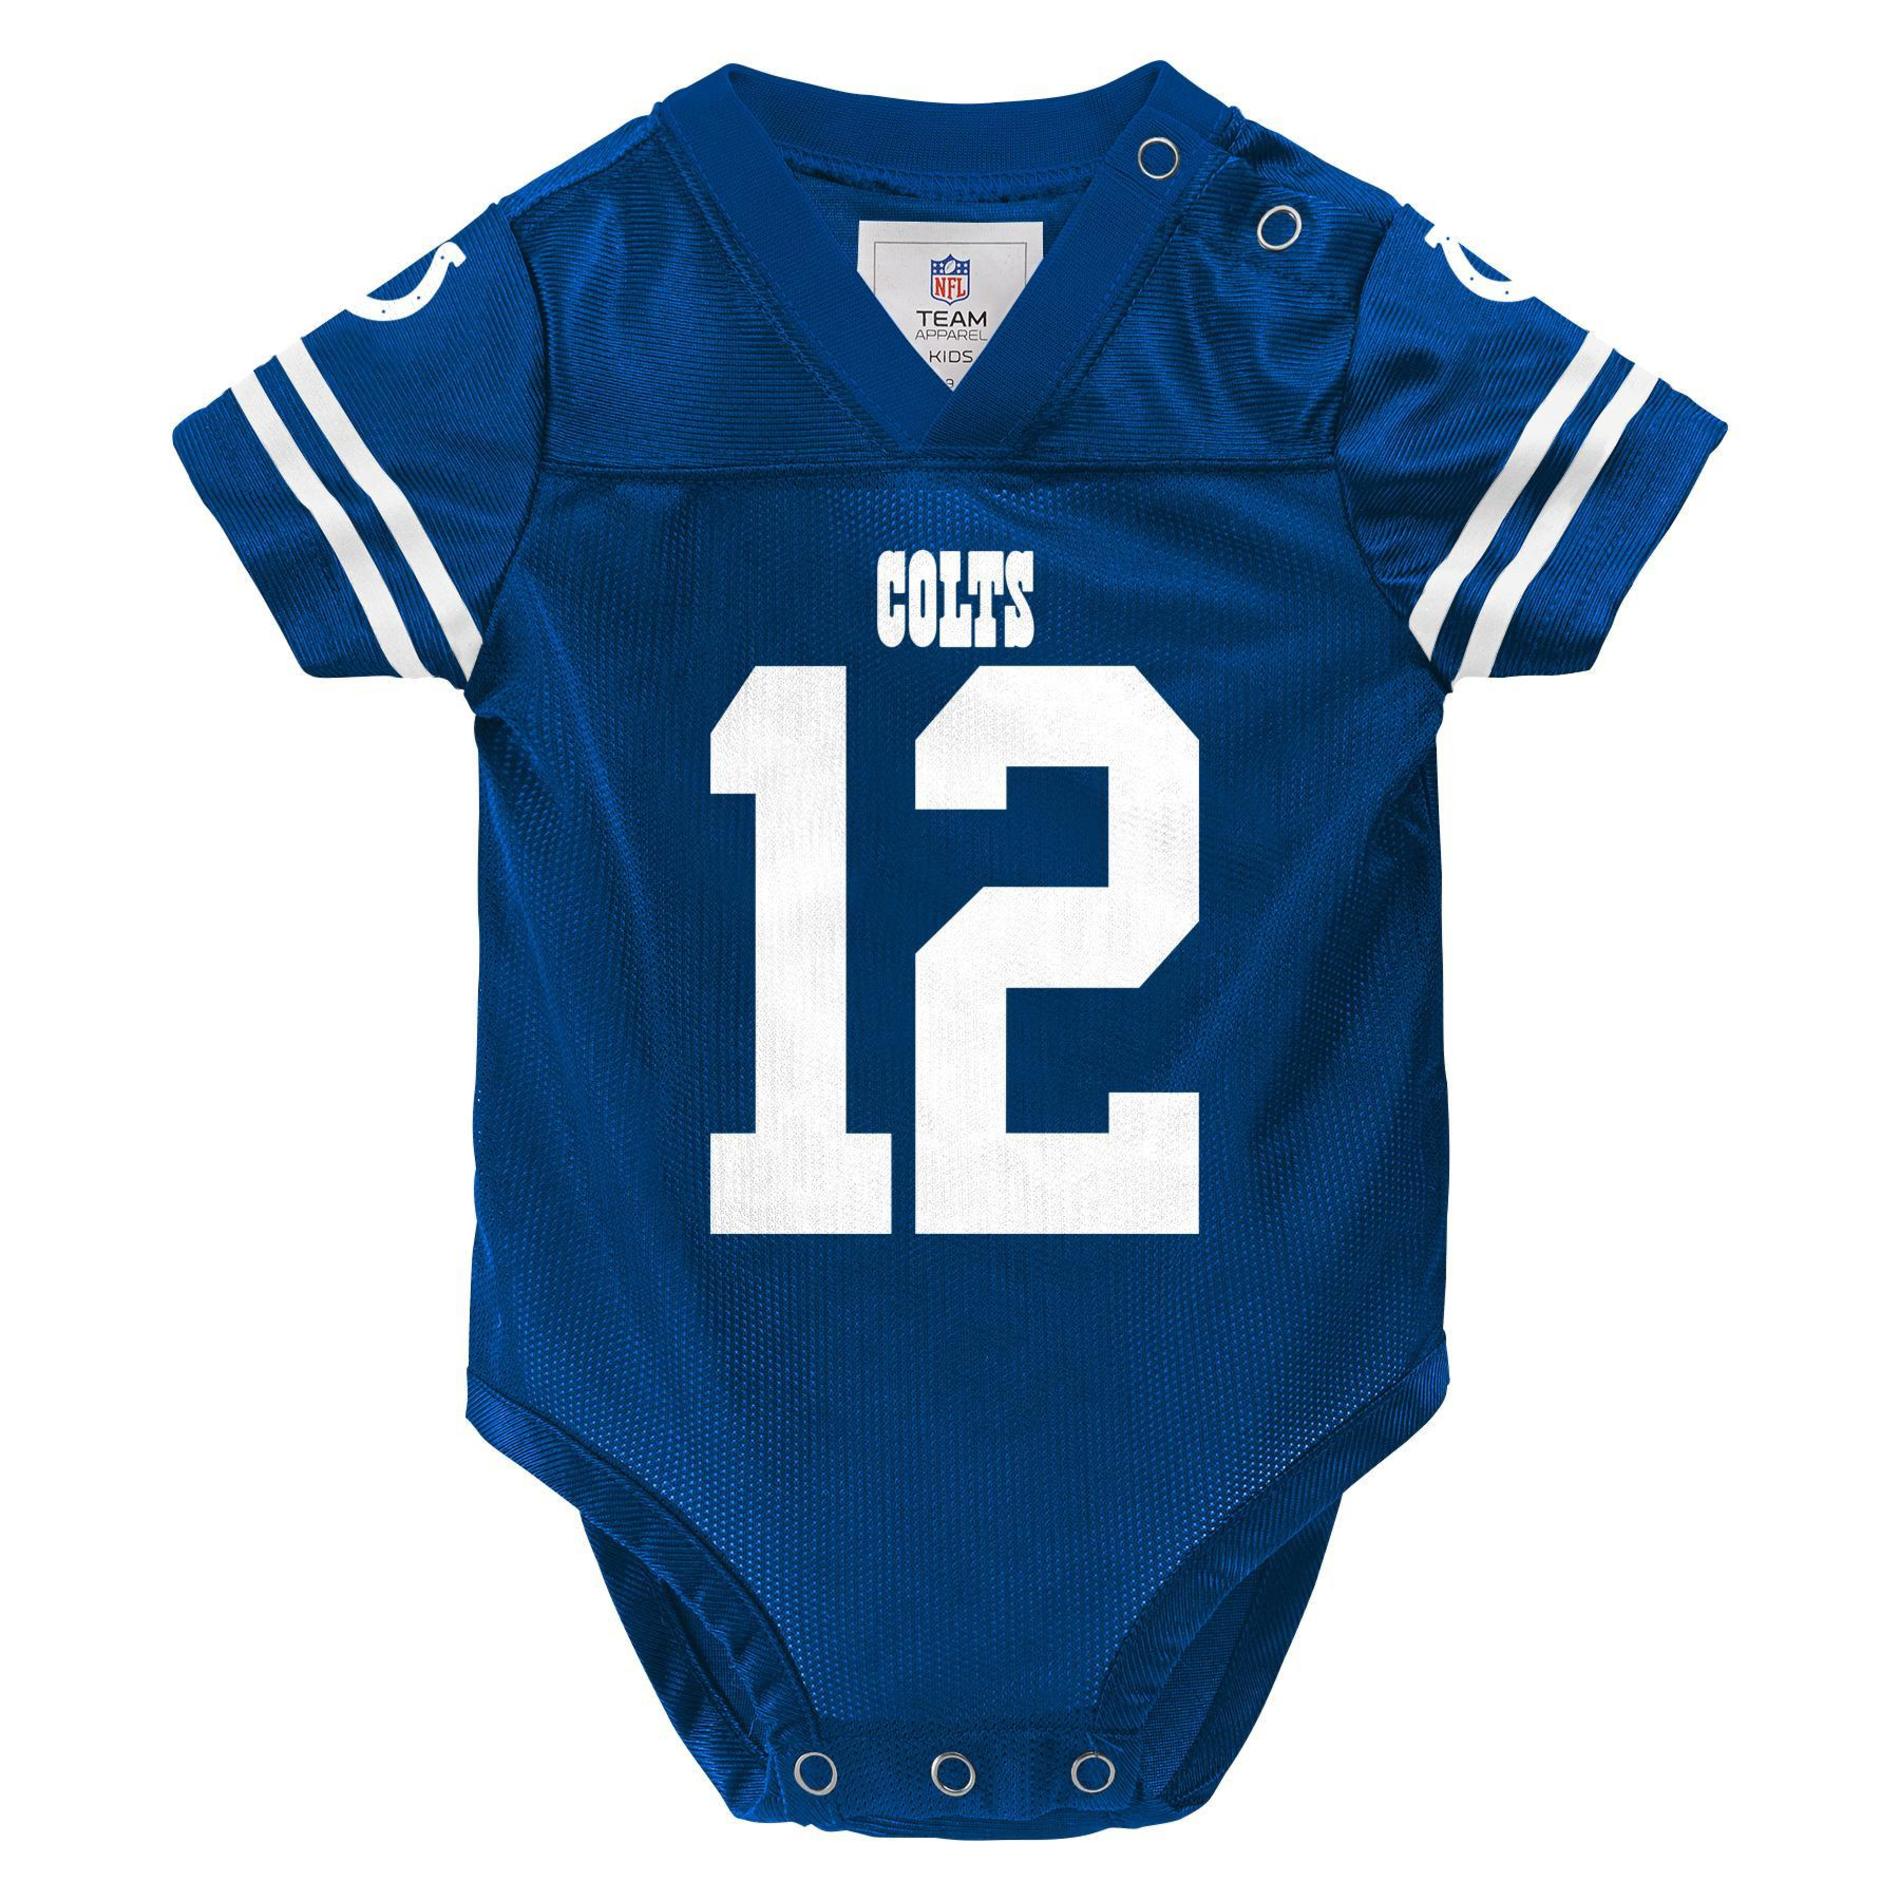 NFL Infants' Player Jersey Bodysuit - Indianapolis Colts Andrew Luck